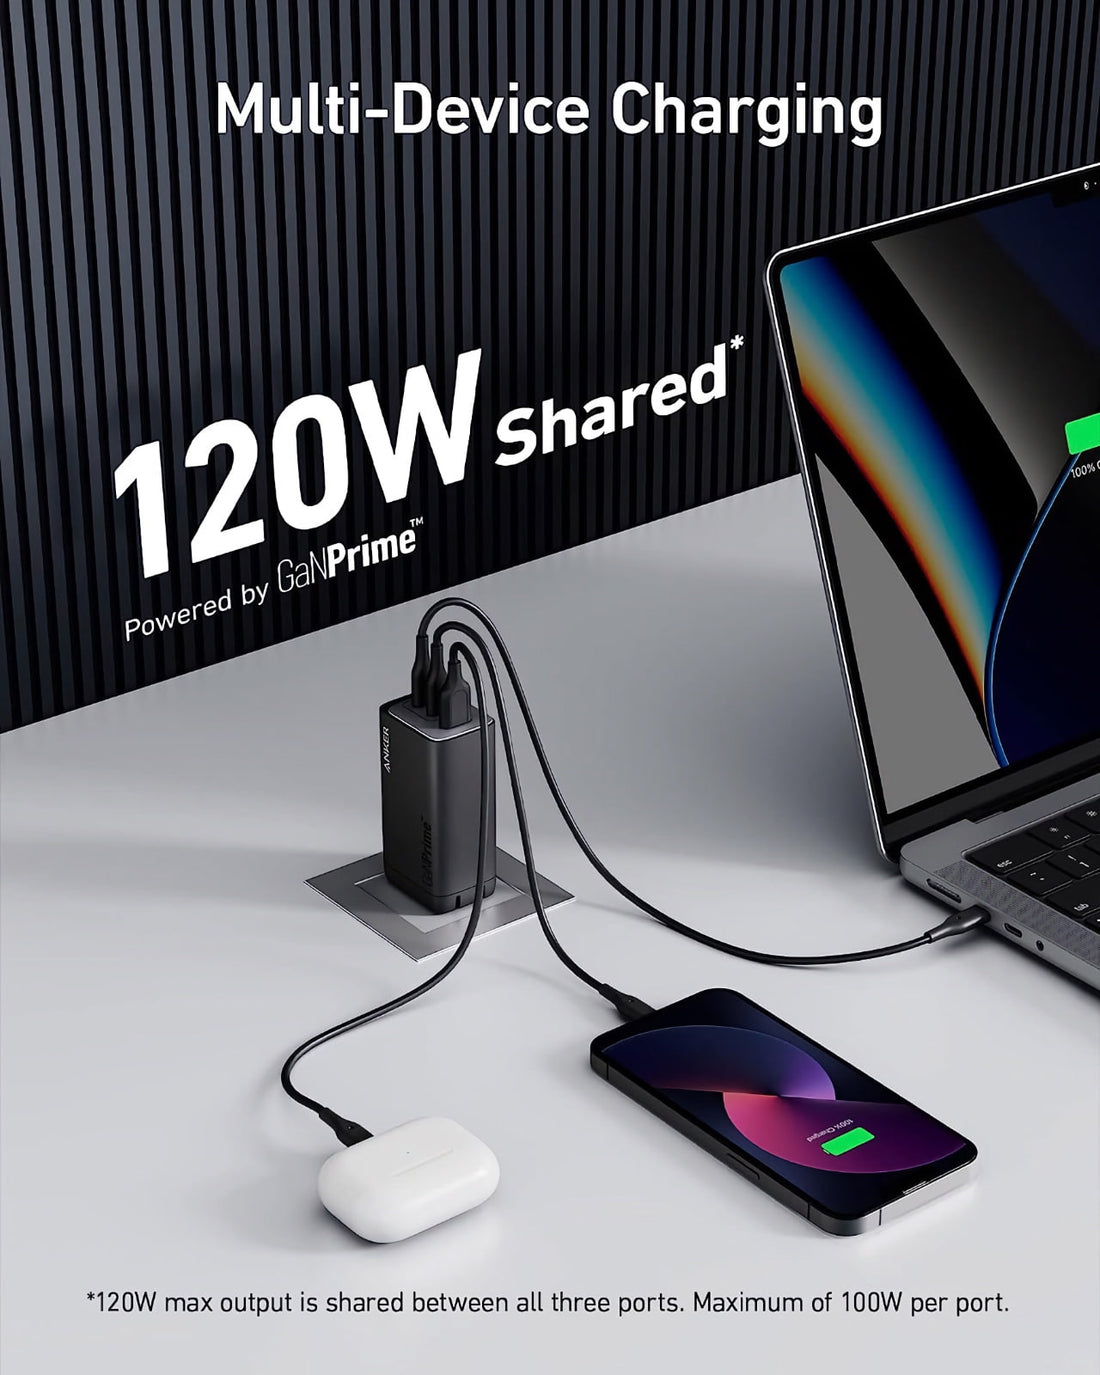 Charge Up Your Life with Anker's 737 GaN 120W Charger - Now at a Stunning Discount!